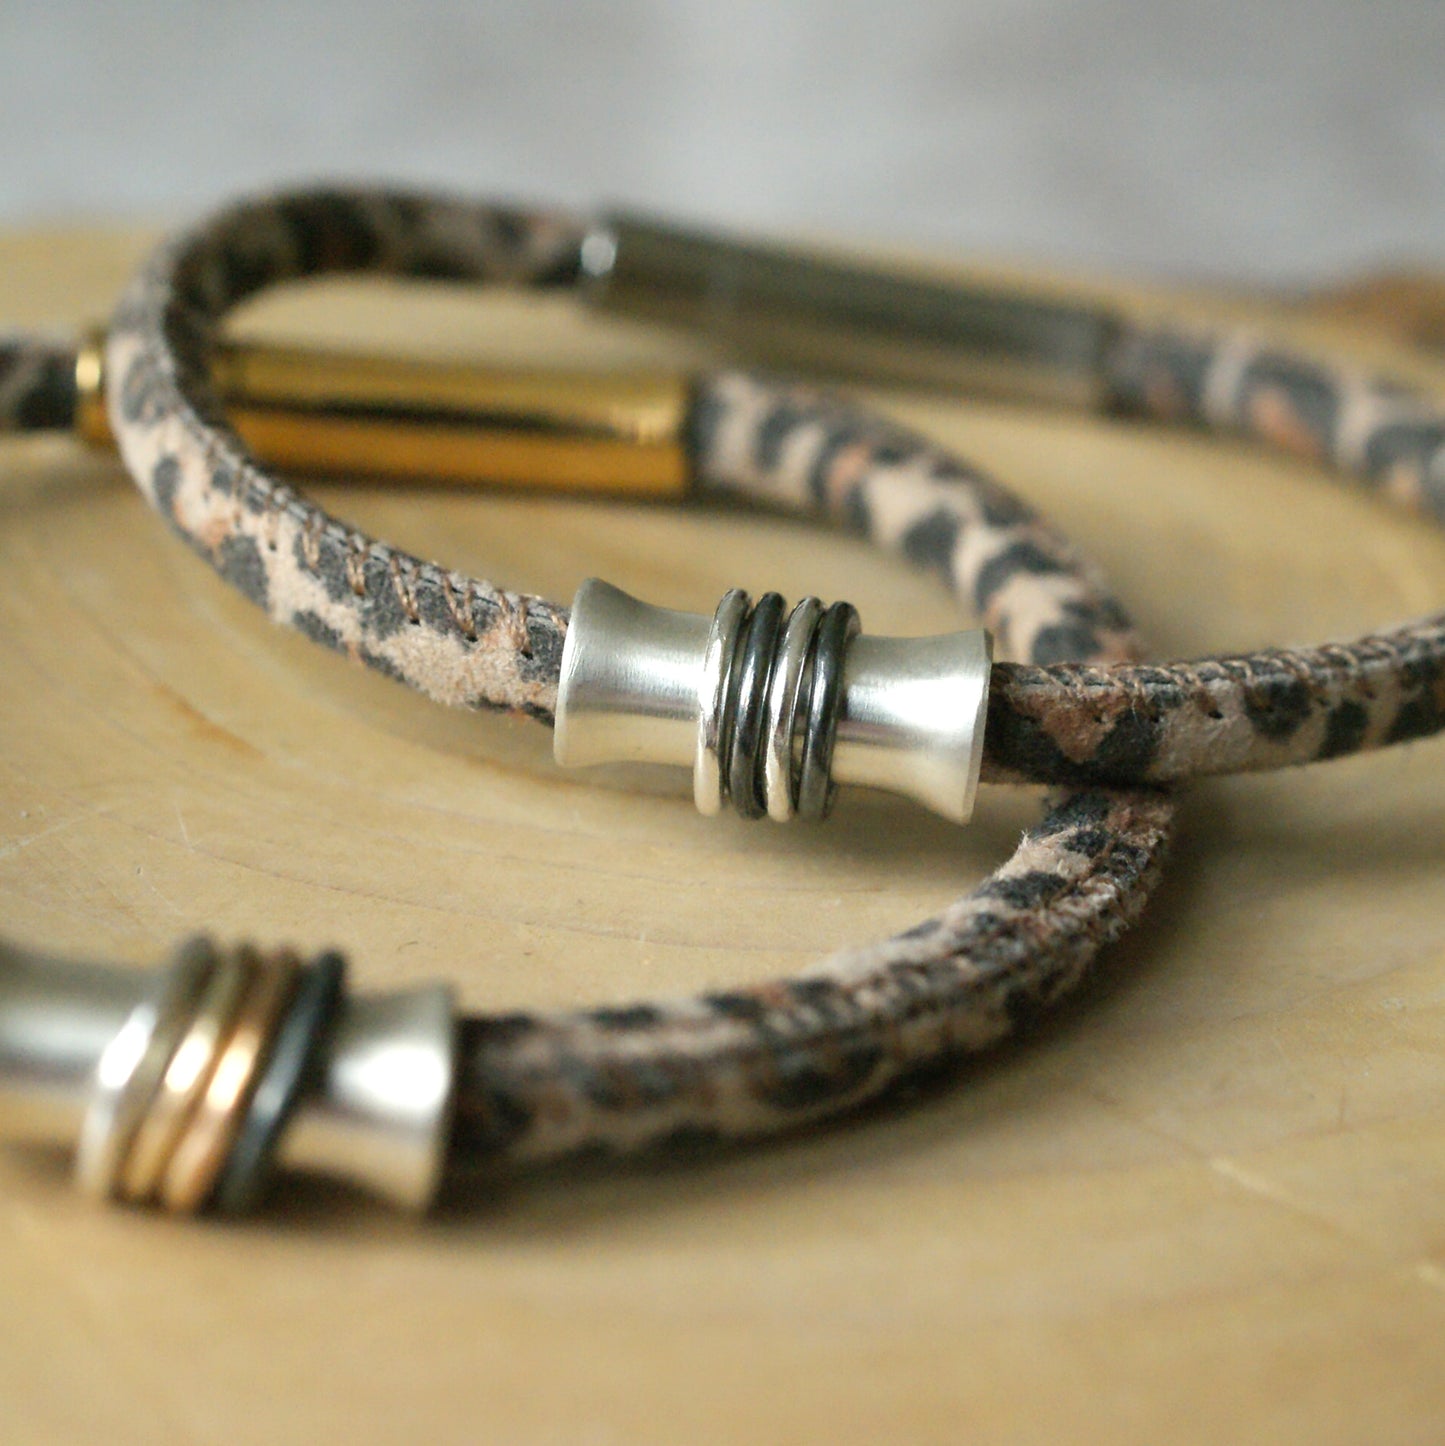 Leopard print leather bracelet with rings